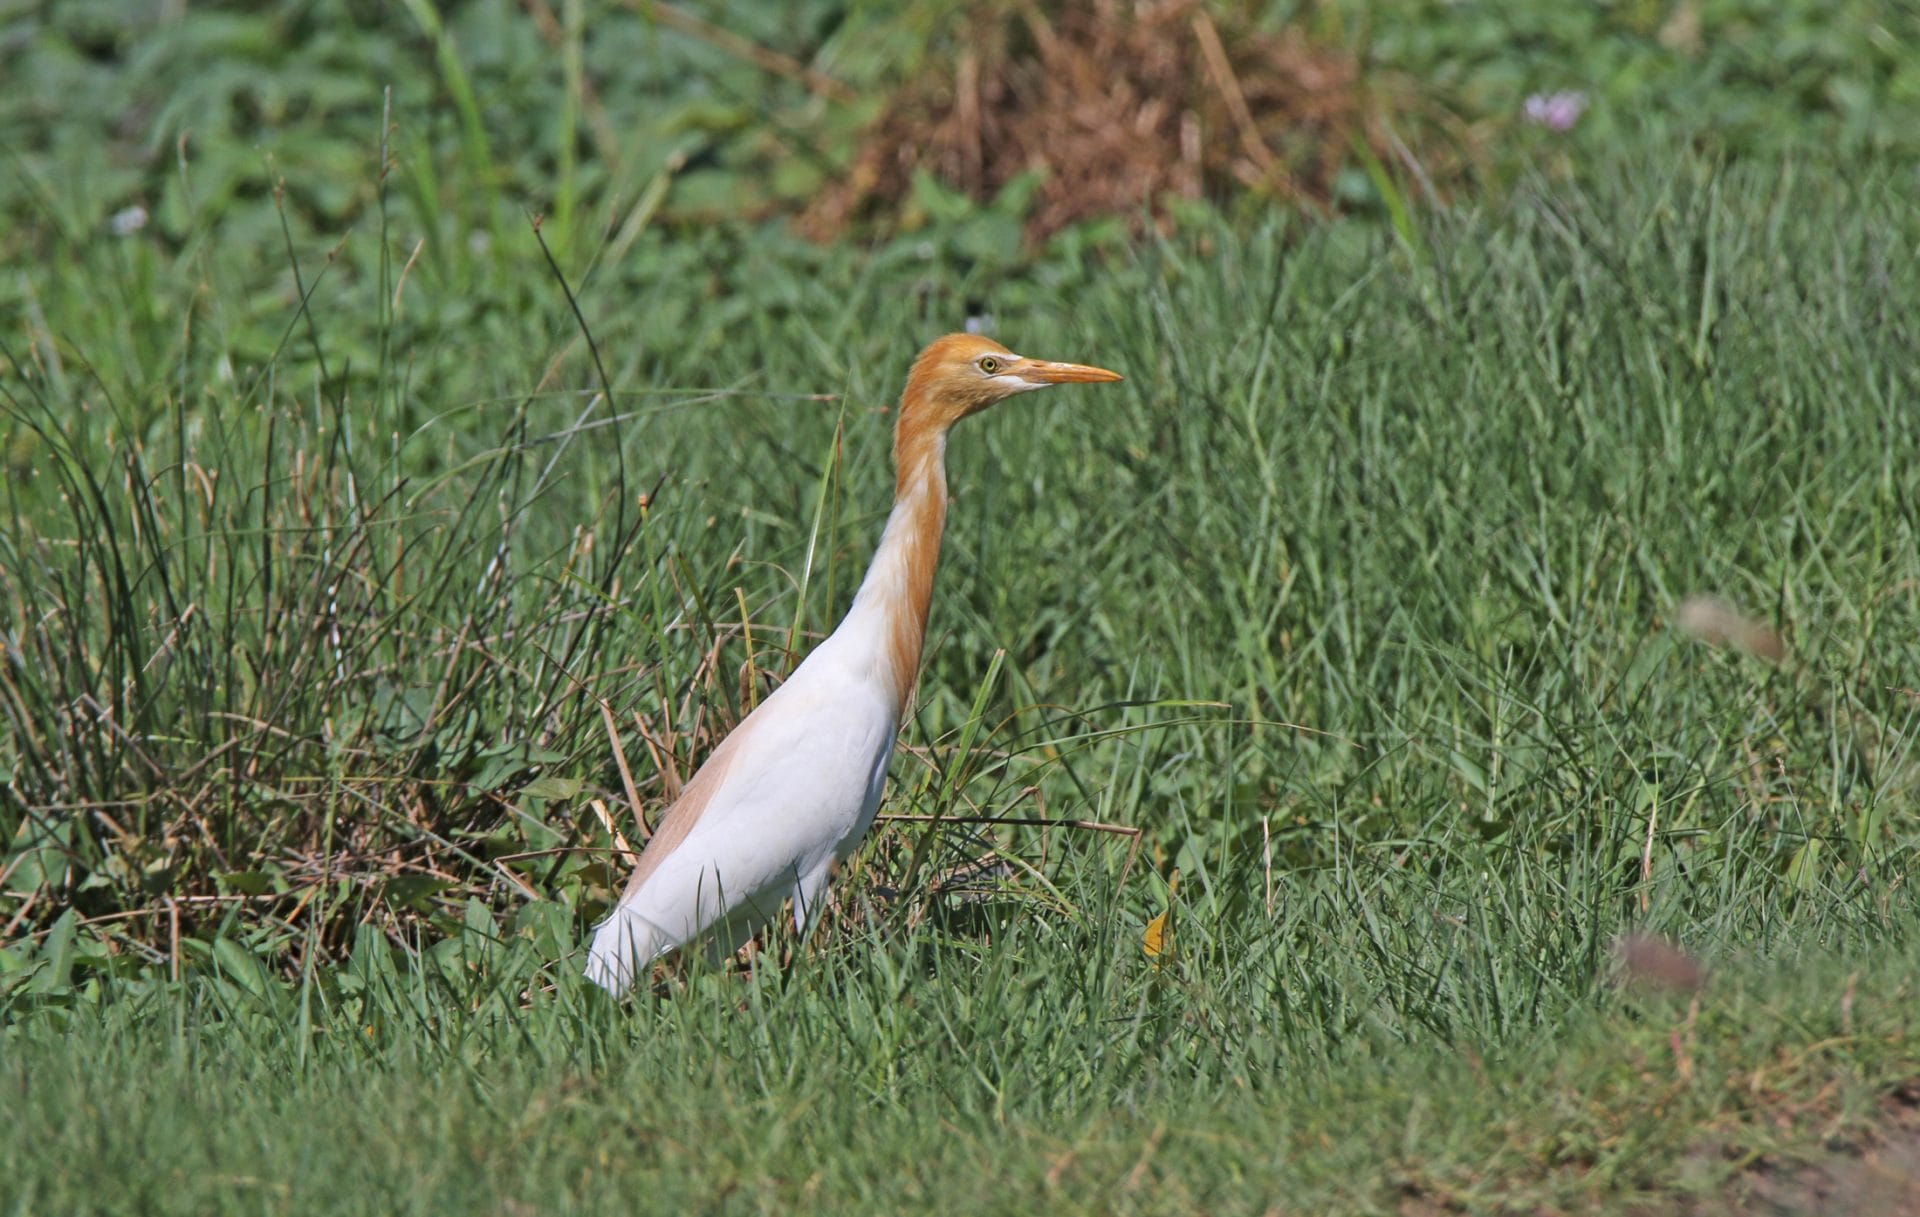 Eastern Cattle Egret. Photo by Pete SImpson.